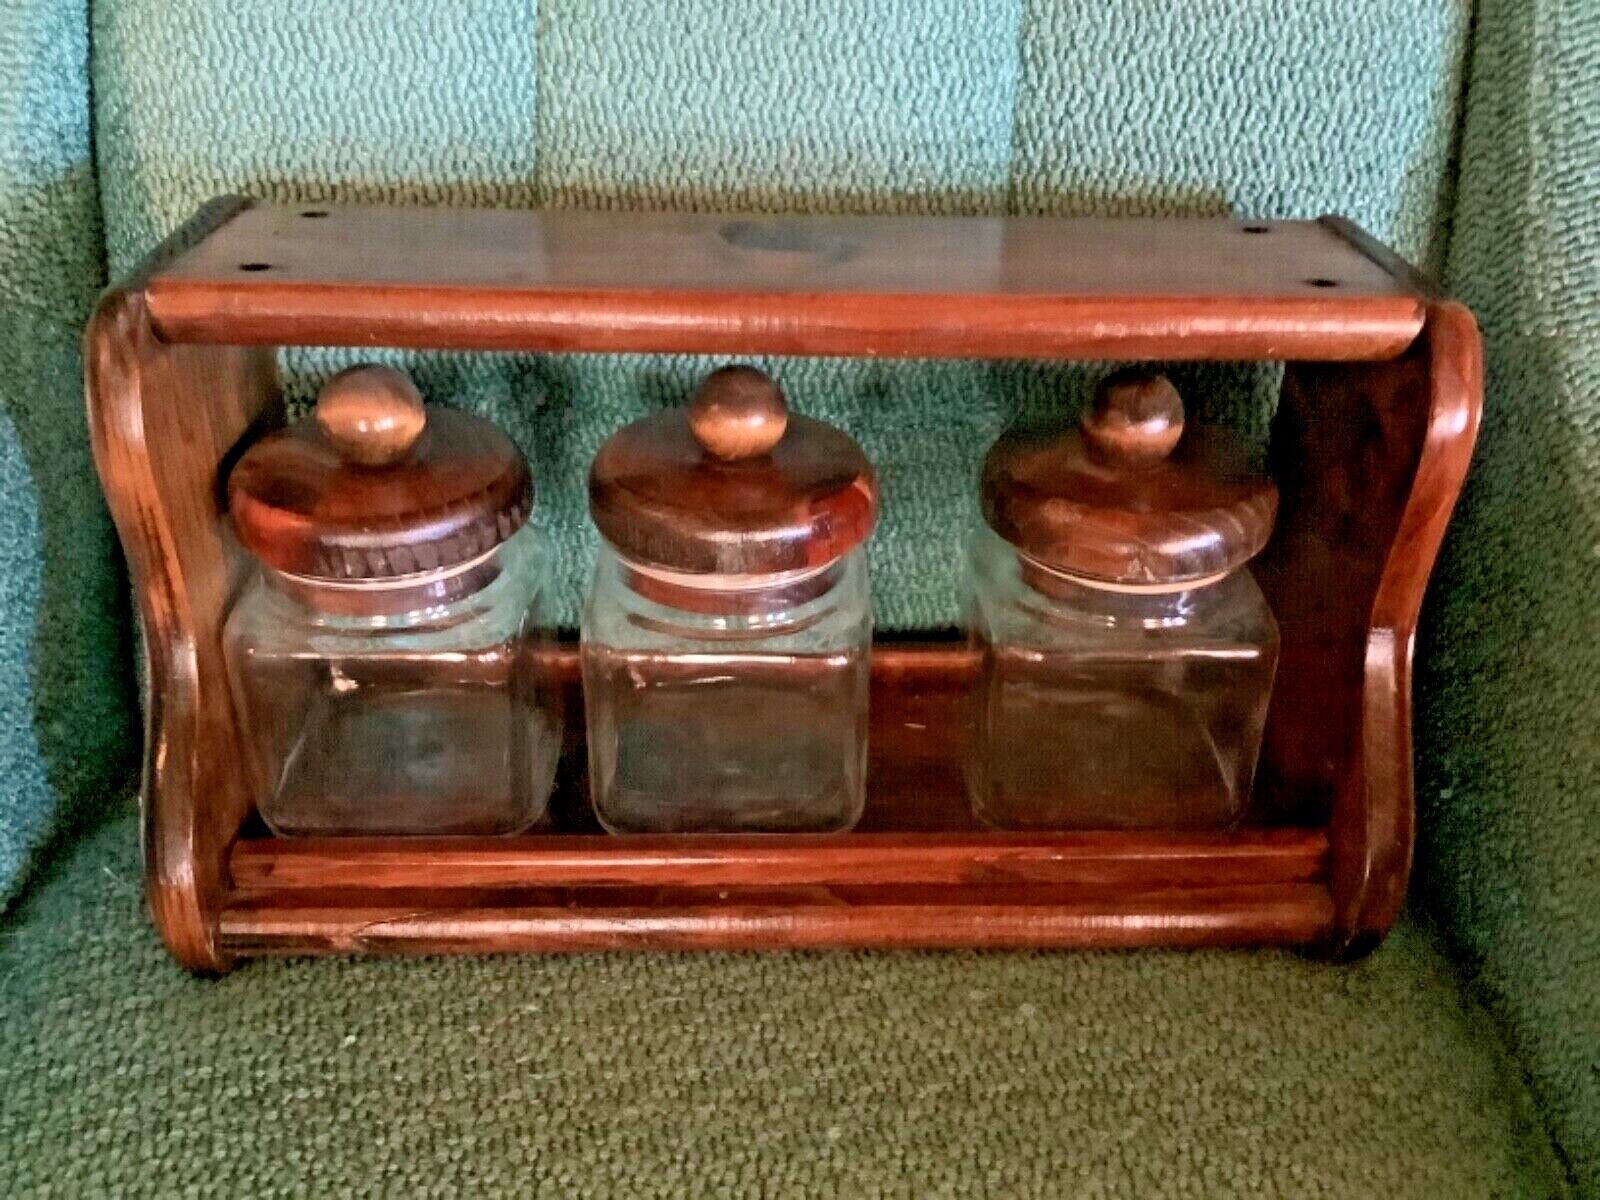 VTg SET 3 GLASS CANISTERS  WOOD LIDS GENERAL STORE CANDY JARS USA Anchor Hocking